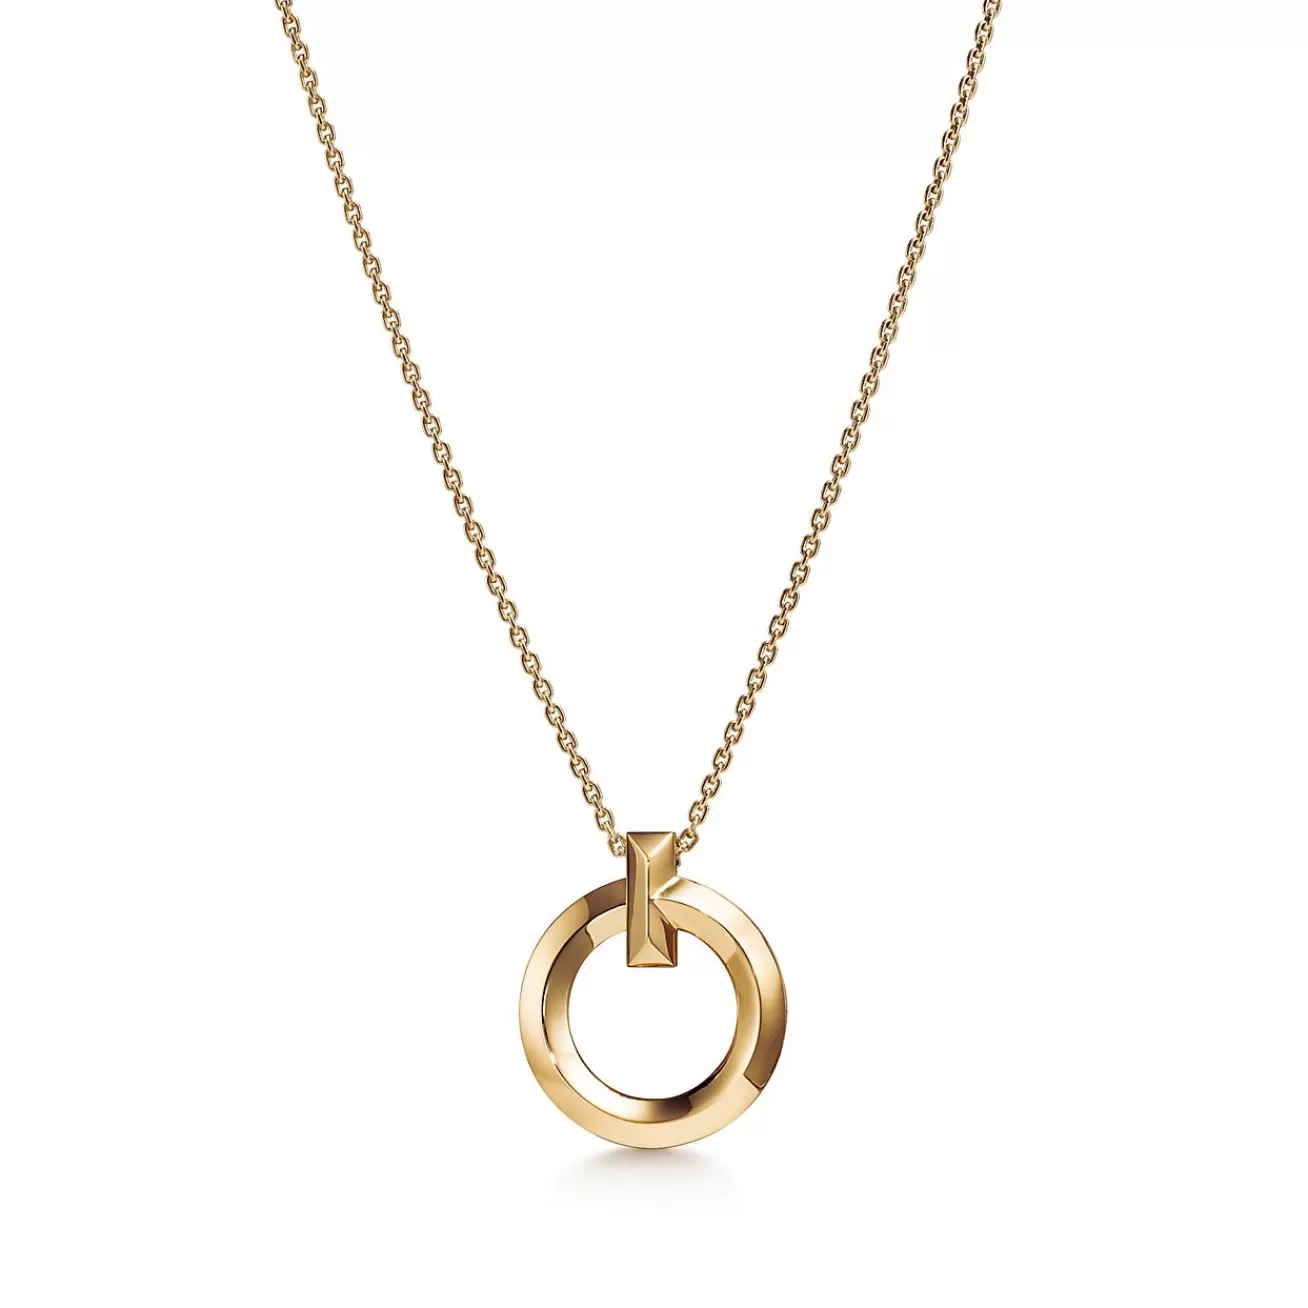 Tiffany & Co. Tiffany T T1 Circle Pendant in Yellow Gold, Small | ^ Necklaces & Pendants | Gifts for Her